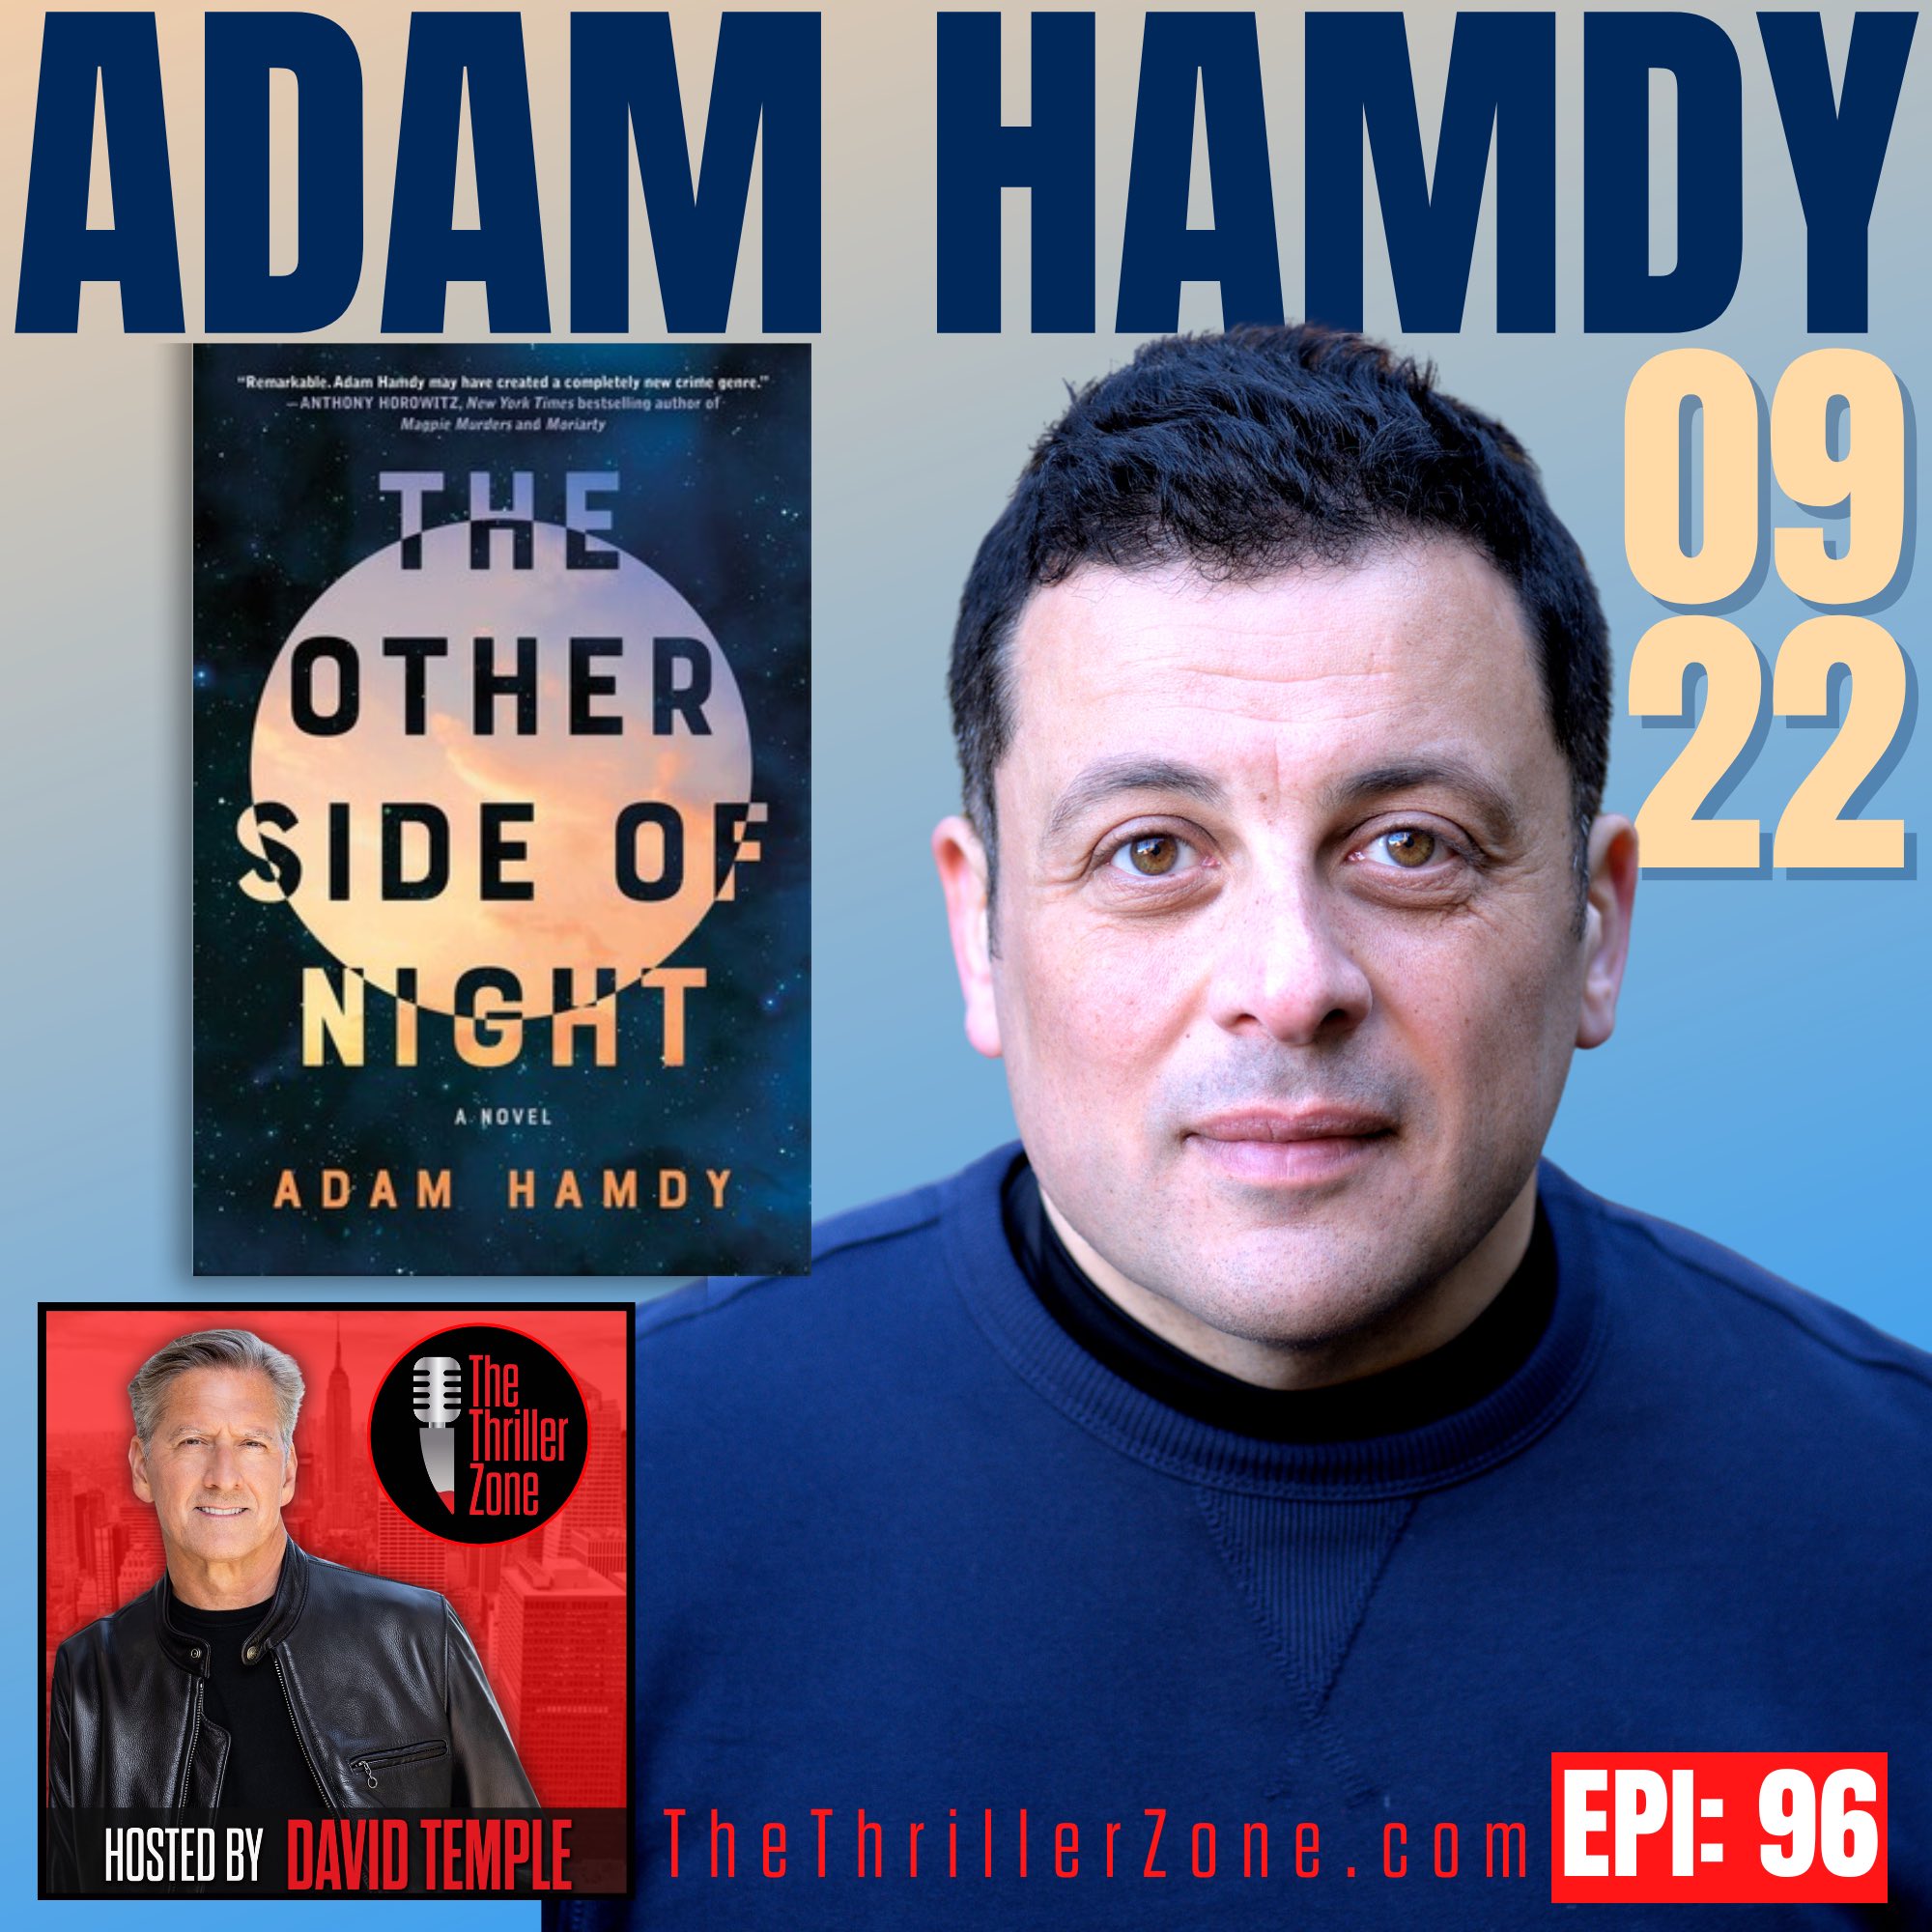 Adam Hamdy, the author of The Other Side of Night Image